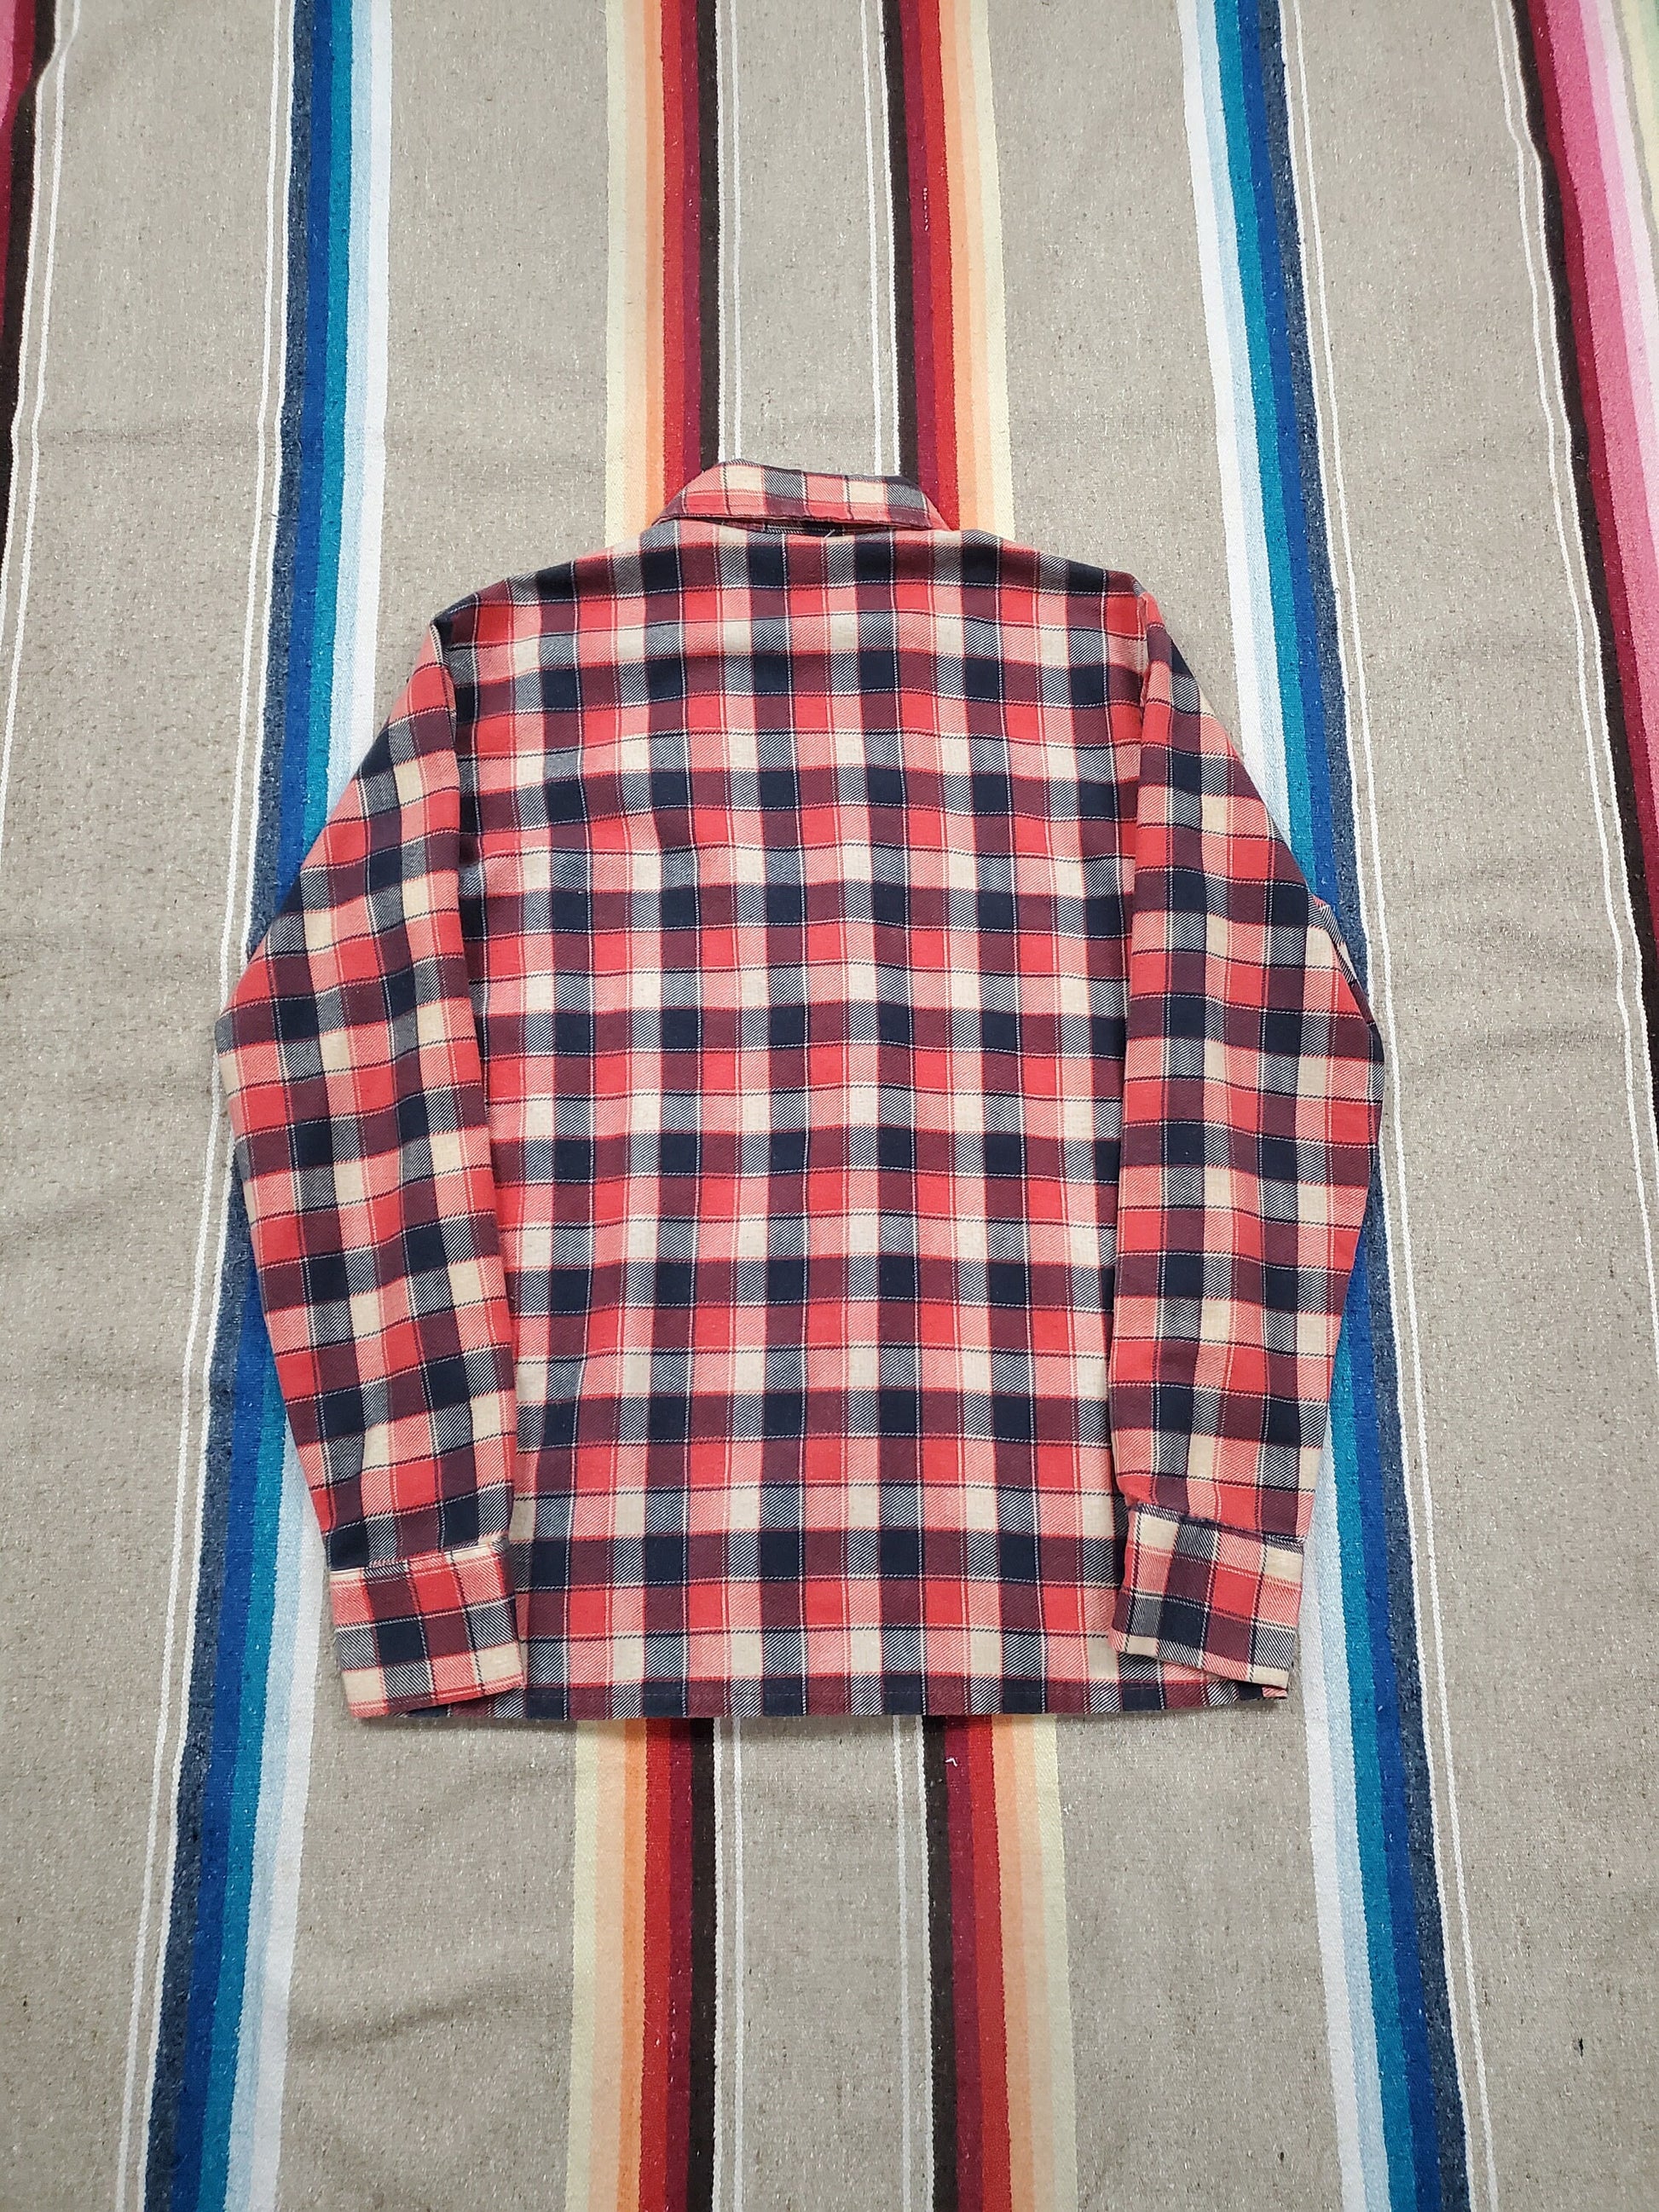 1980s Sears Style Works Perma-Prest Printed Flannel Shirt Size S